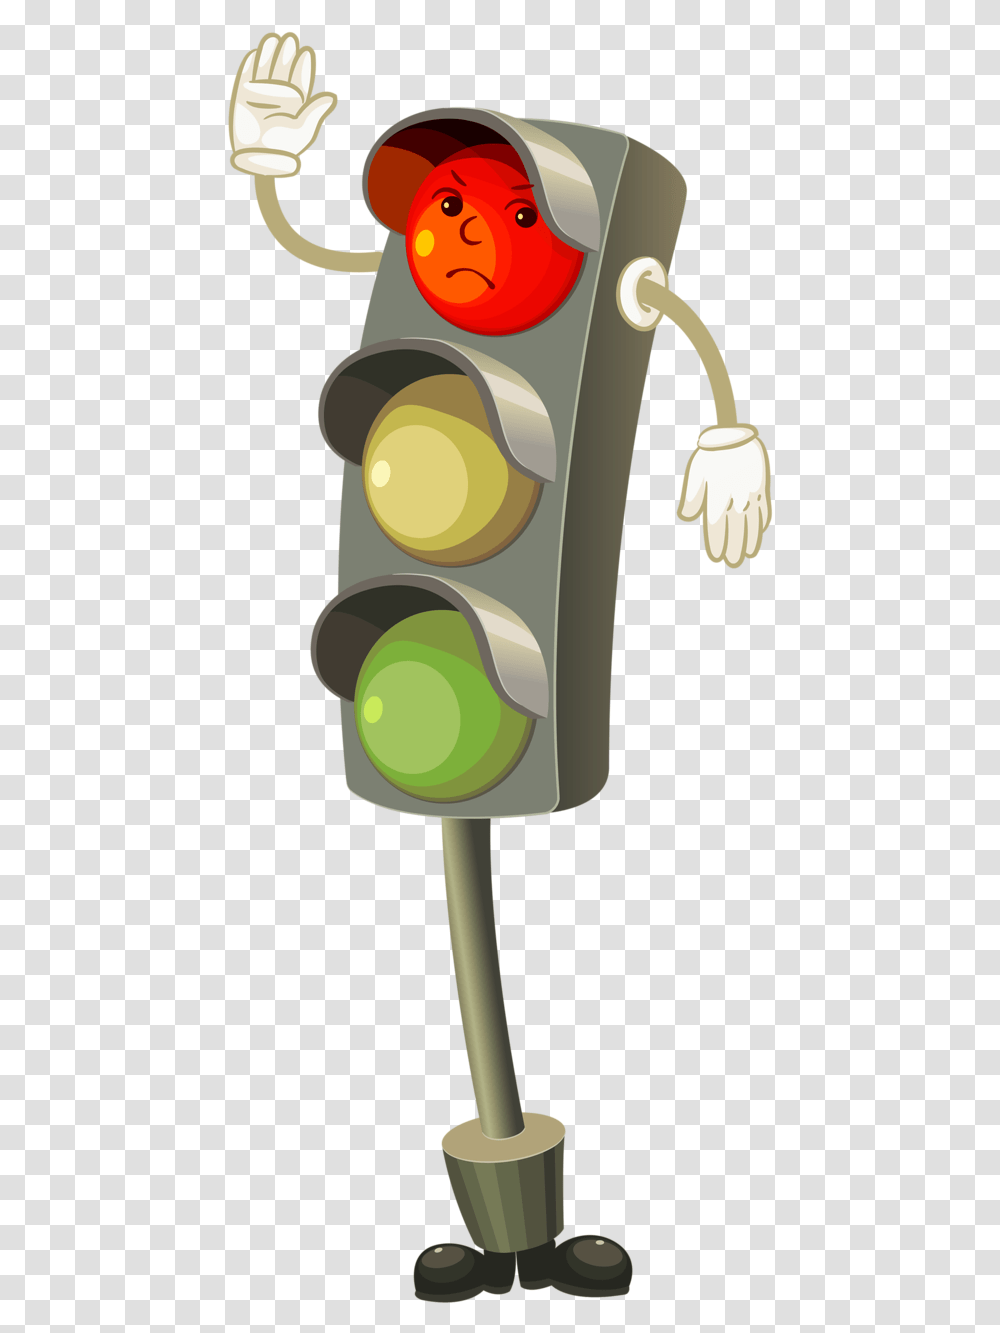 Stop Light Related To Traffic Rules, Traffic Light Transparent Png